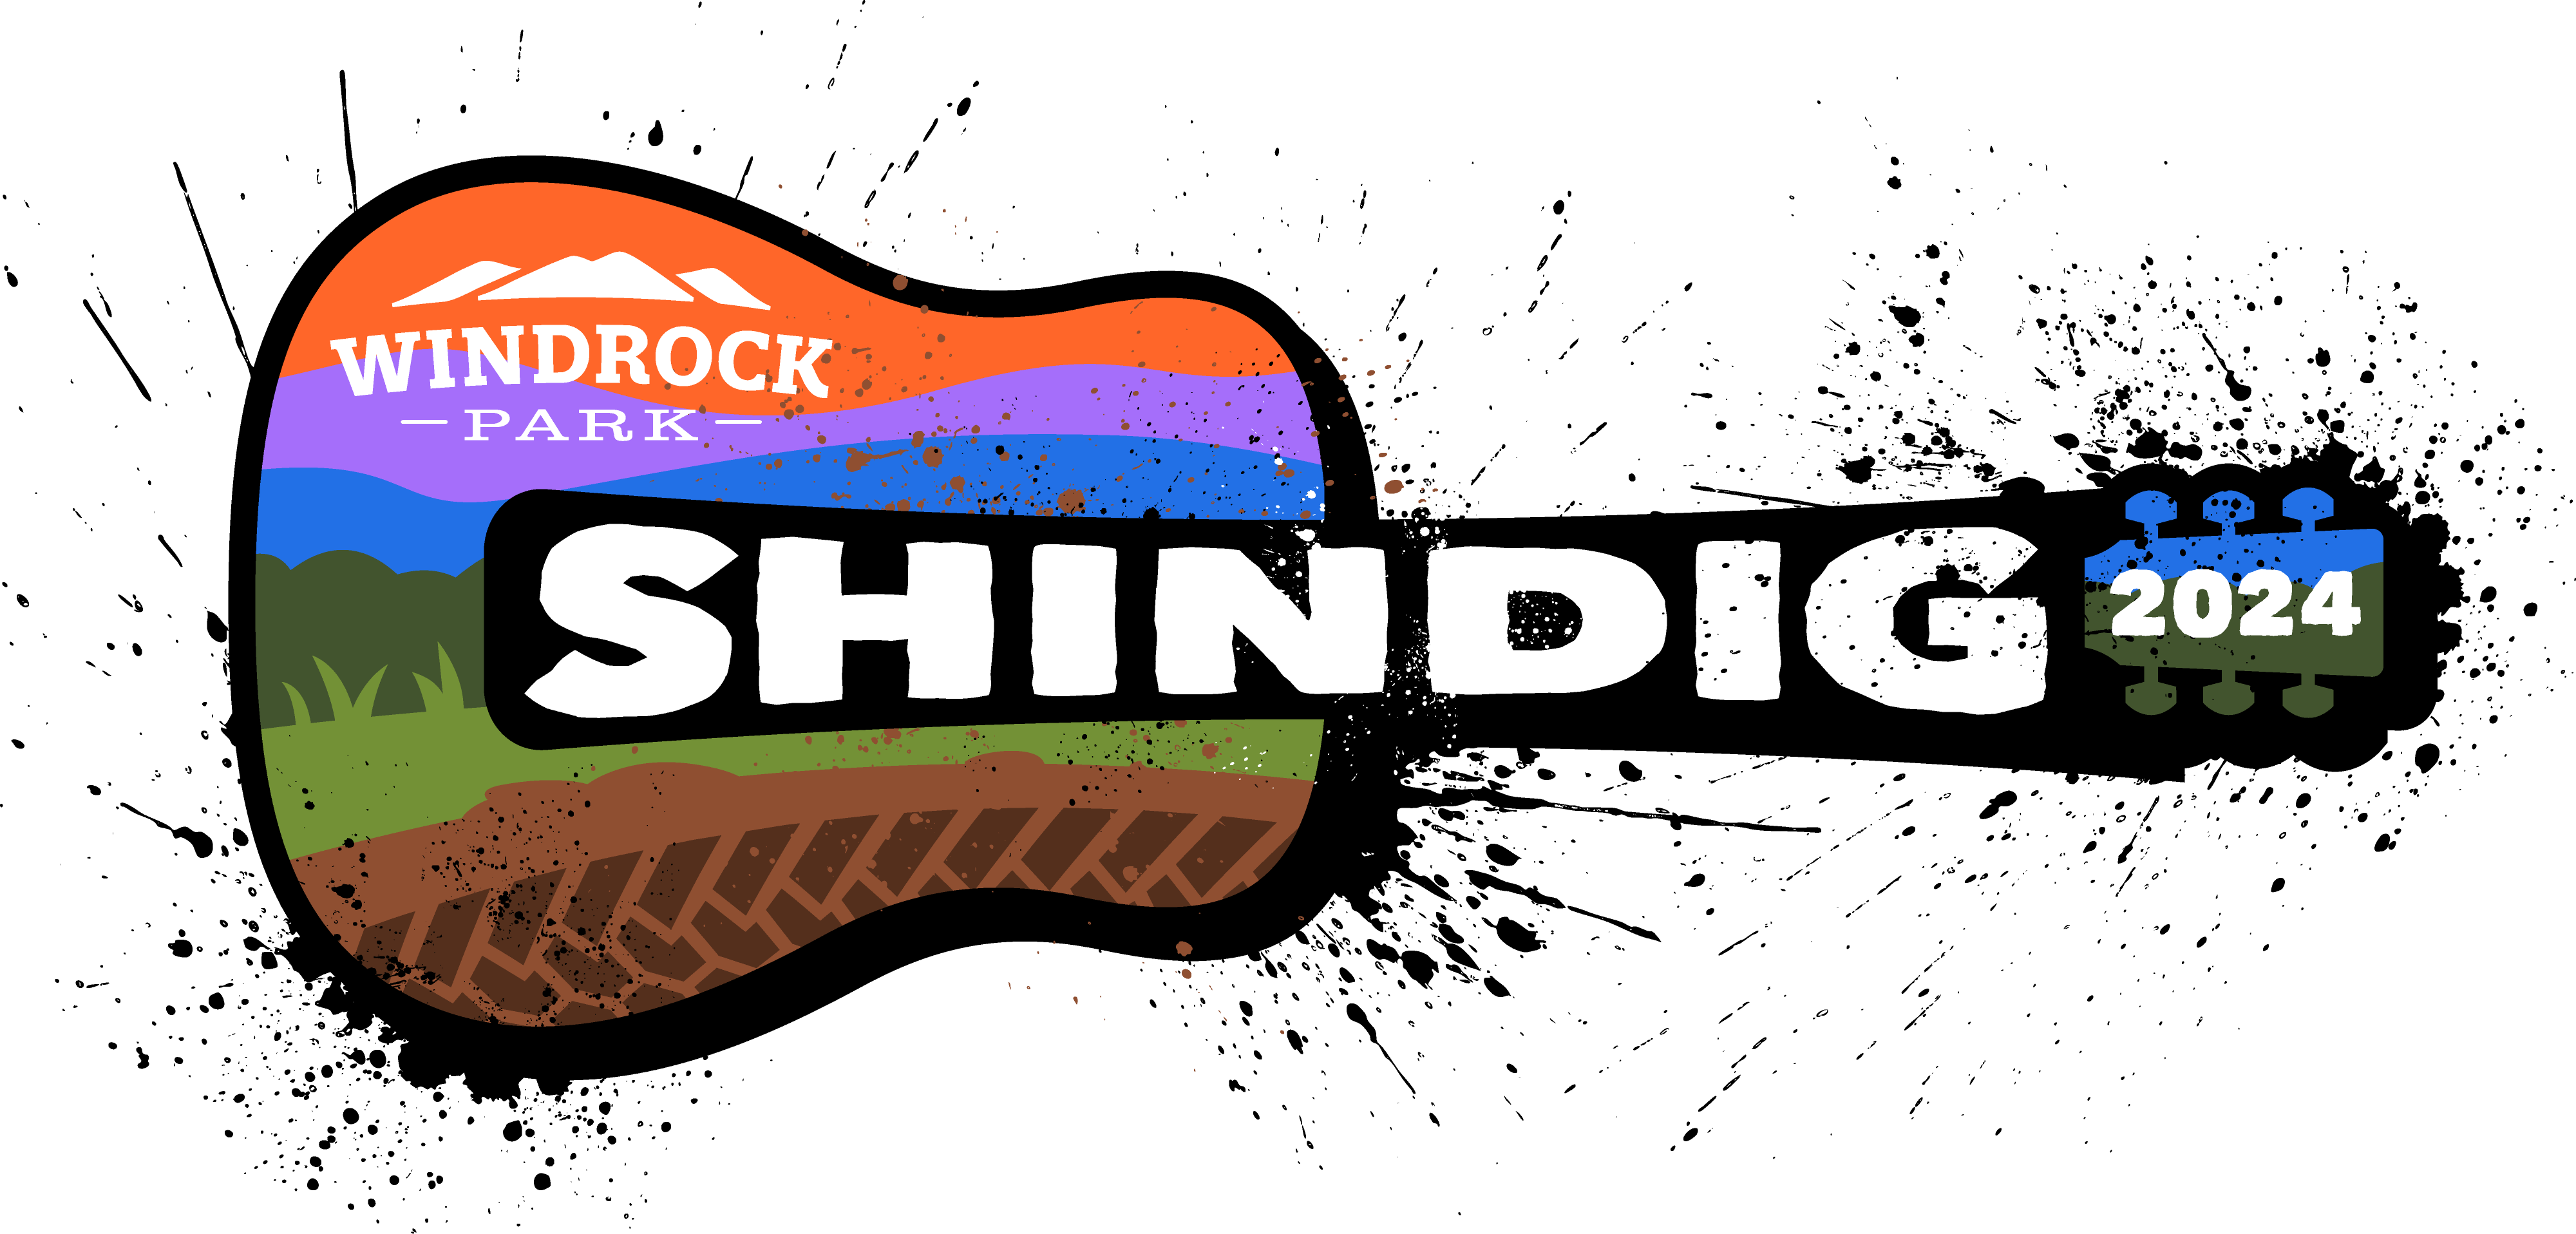 Shindig - Windrock Park's Music Event